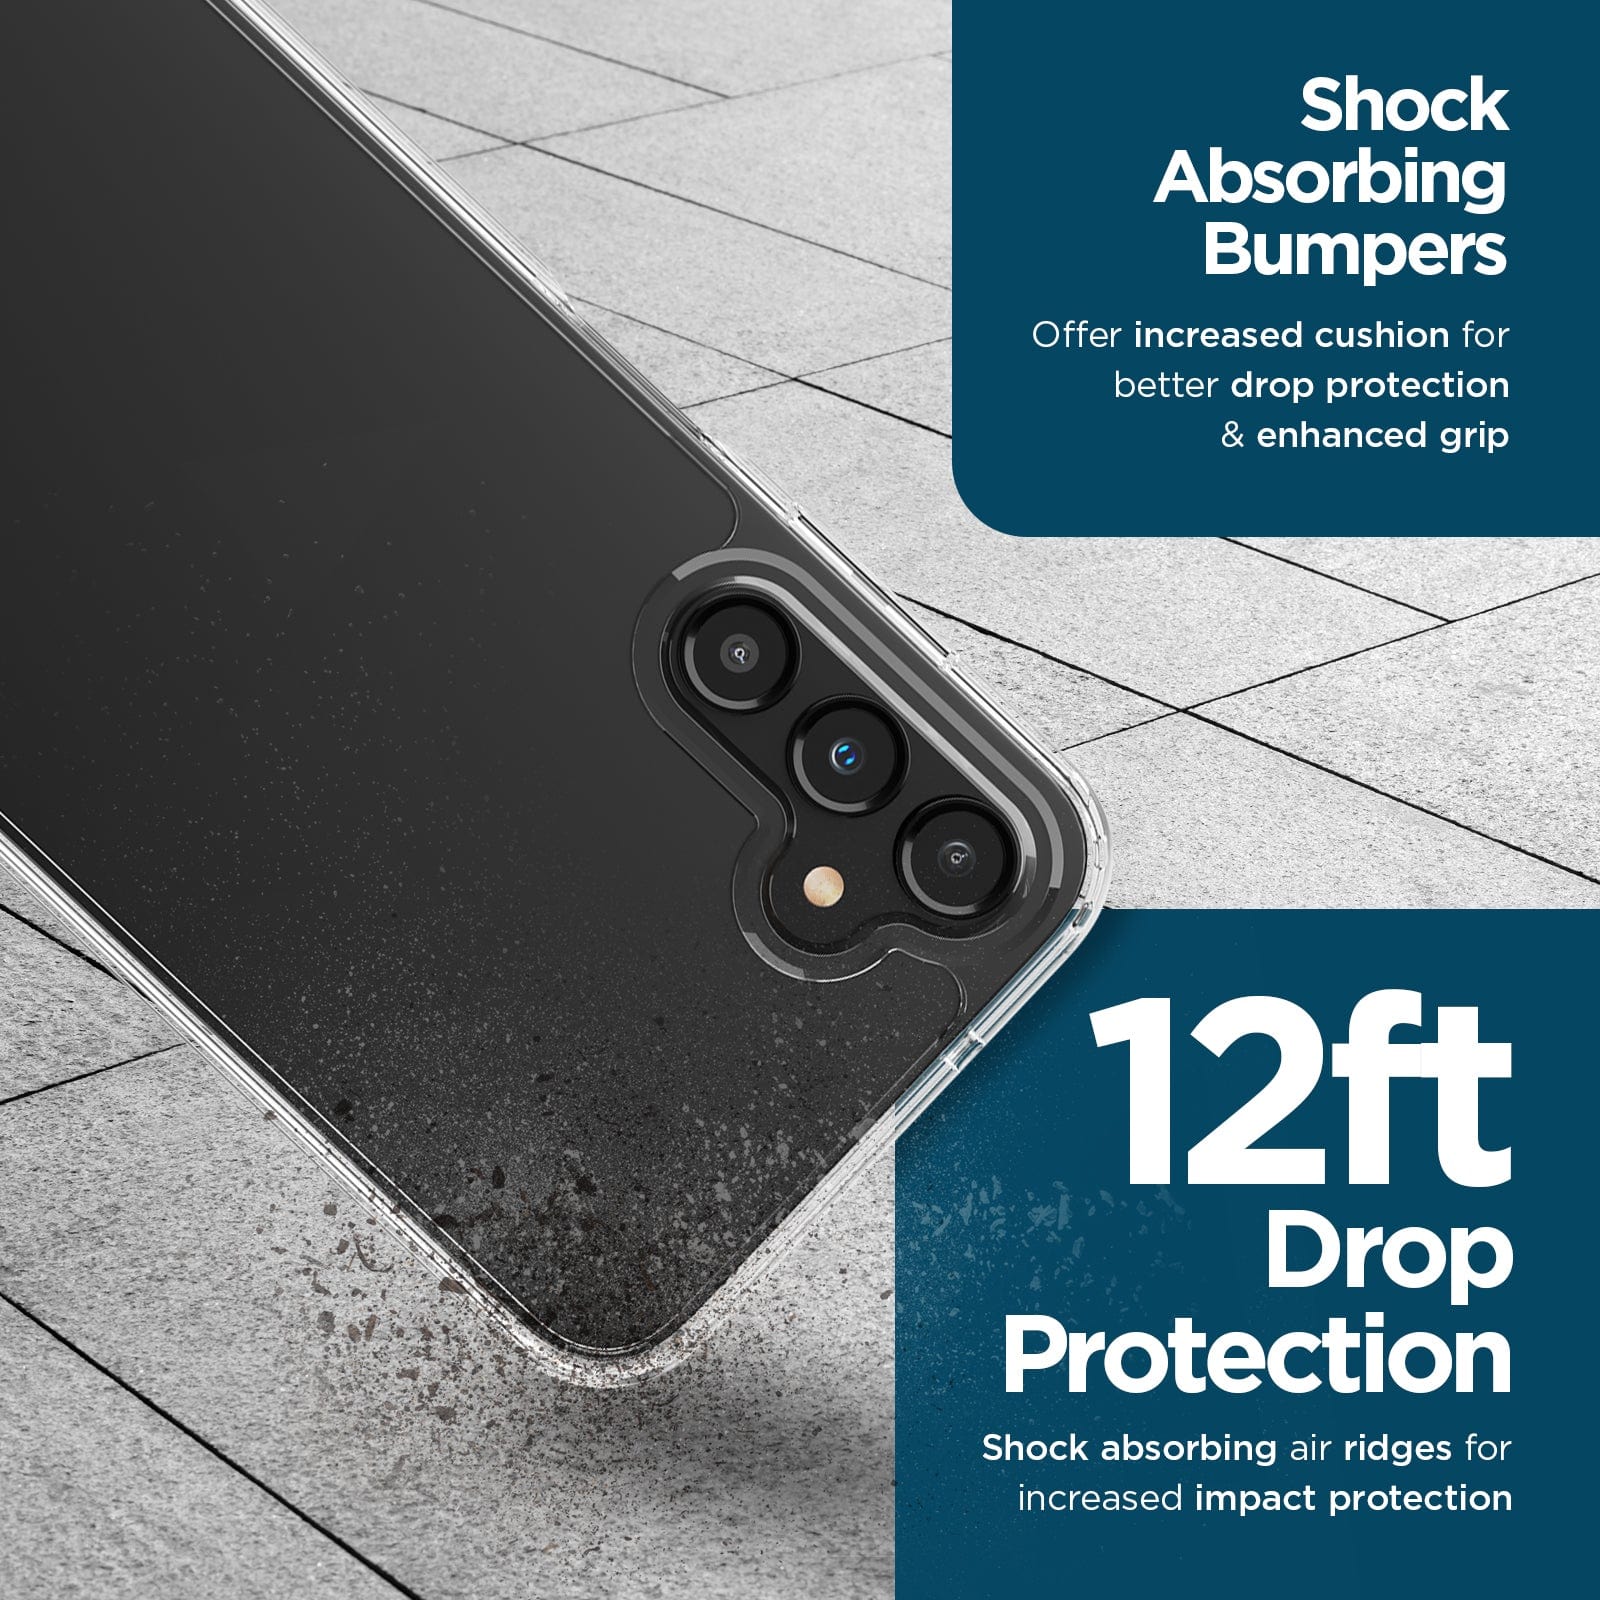 SHOCK ABSORBING BUMPERS OFFER INCREASED CUSHION FOR BETTER DROP PROTECTION AND ENHANCED GRIP. 12FT DROP PROTECTION SHOCK ABSORBING AIR RIDGES FOR INCREASED IMPACT PROTECTION.